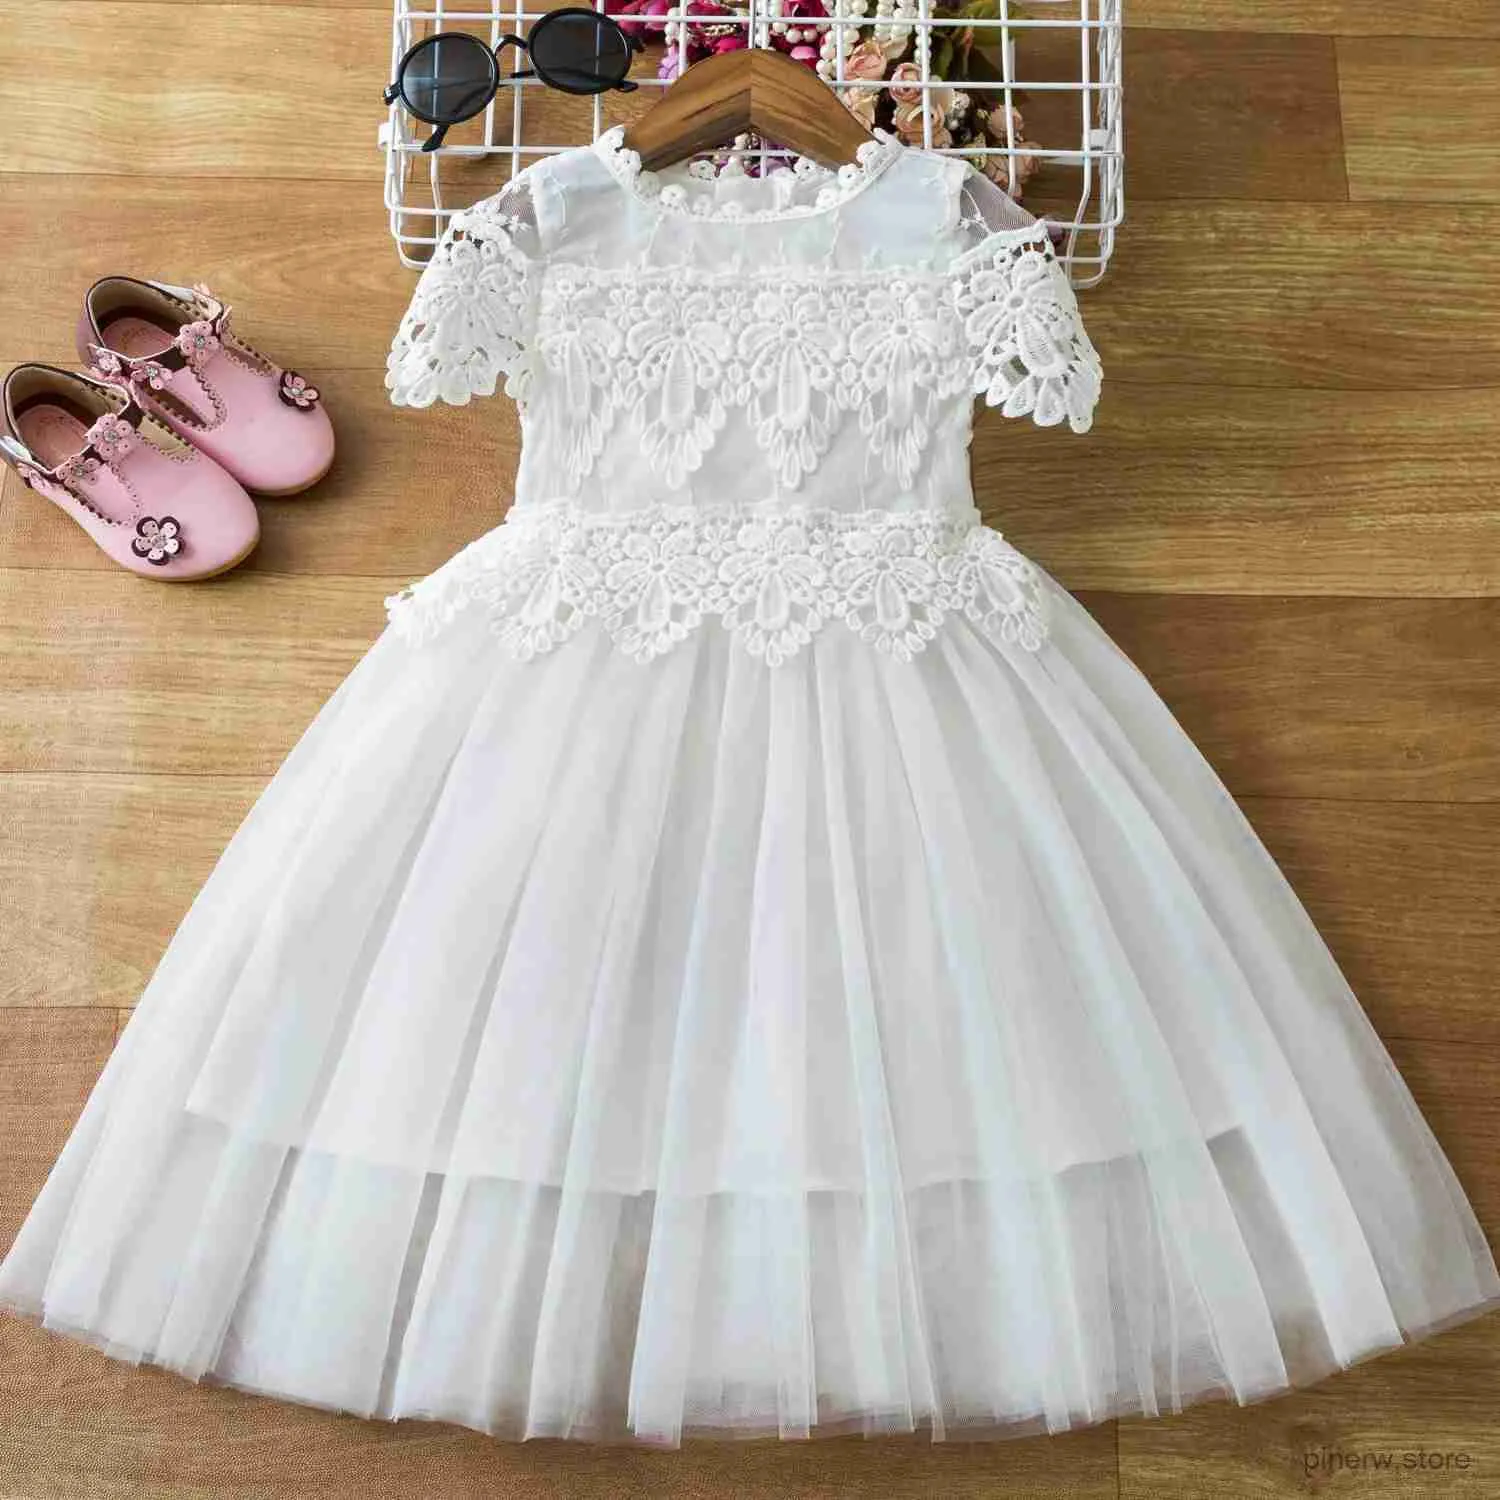 Girl's Dresses Little Girl New Floral Lace Dress Girl Gray Hollow Flower Tulle Clothes Cute Girl Birthday Party Princess Costume Kid Maxi Dress